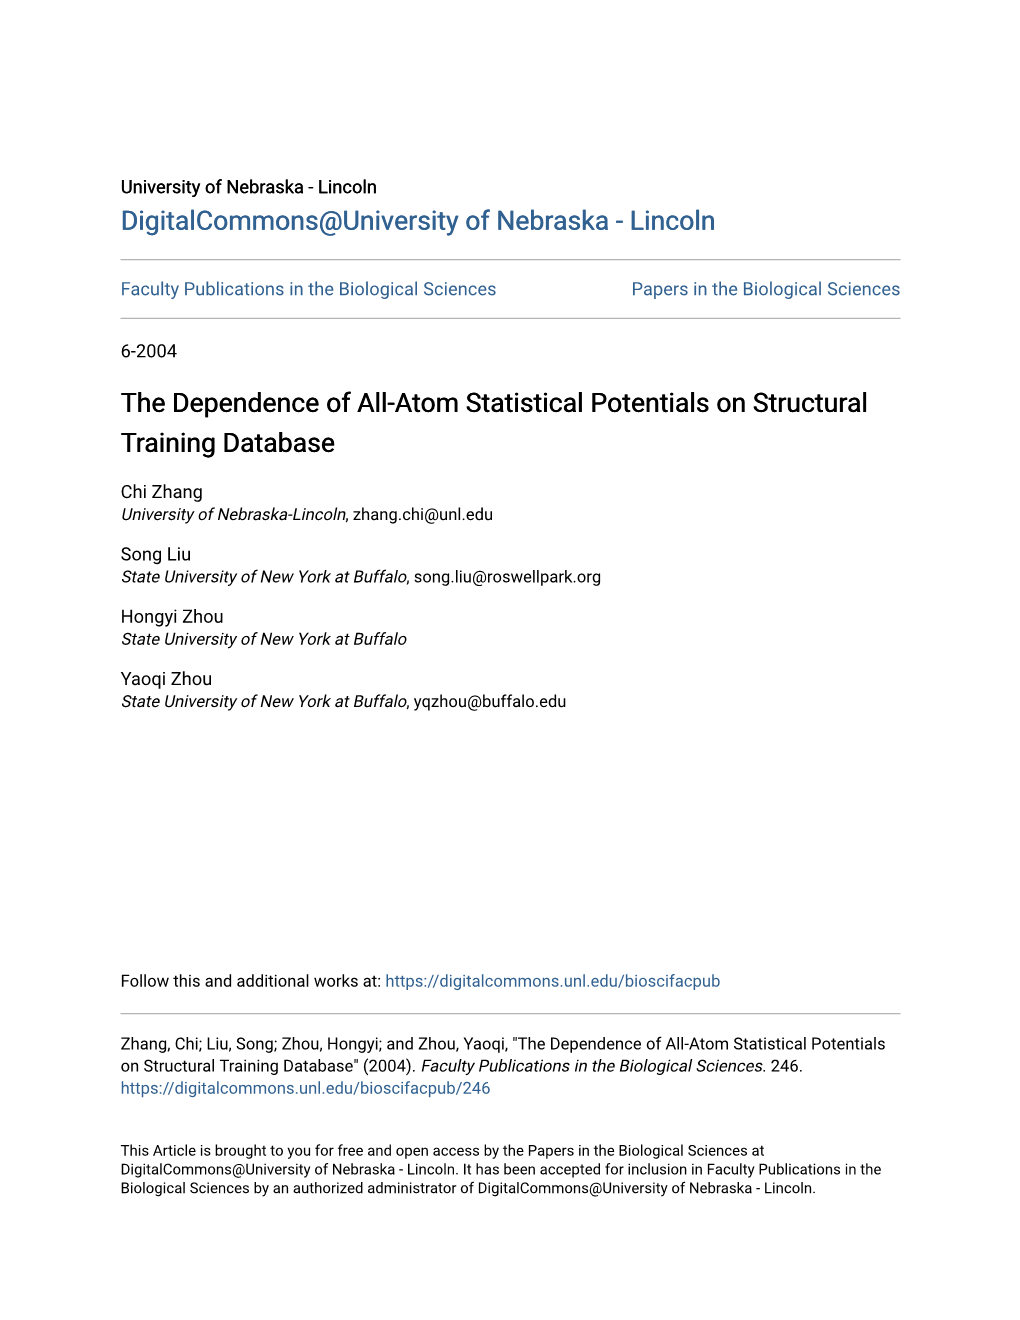 The Dependence of All-Atom Statistical Potentials on Structural Training Database